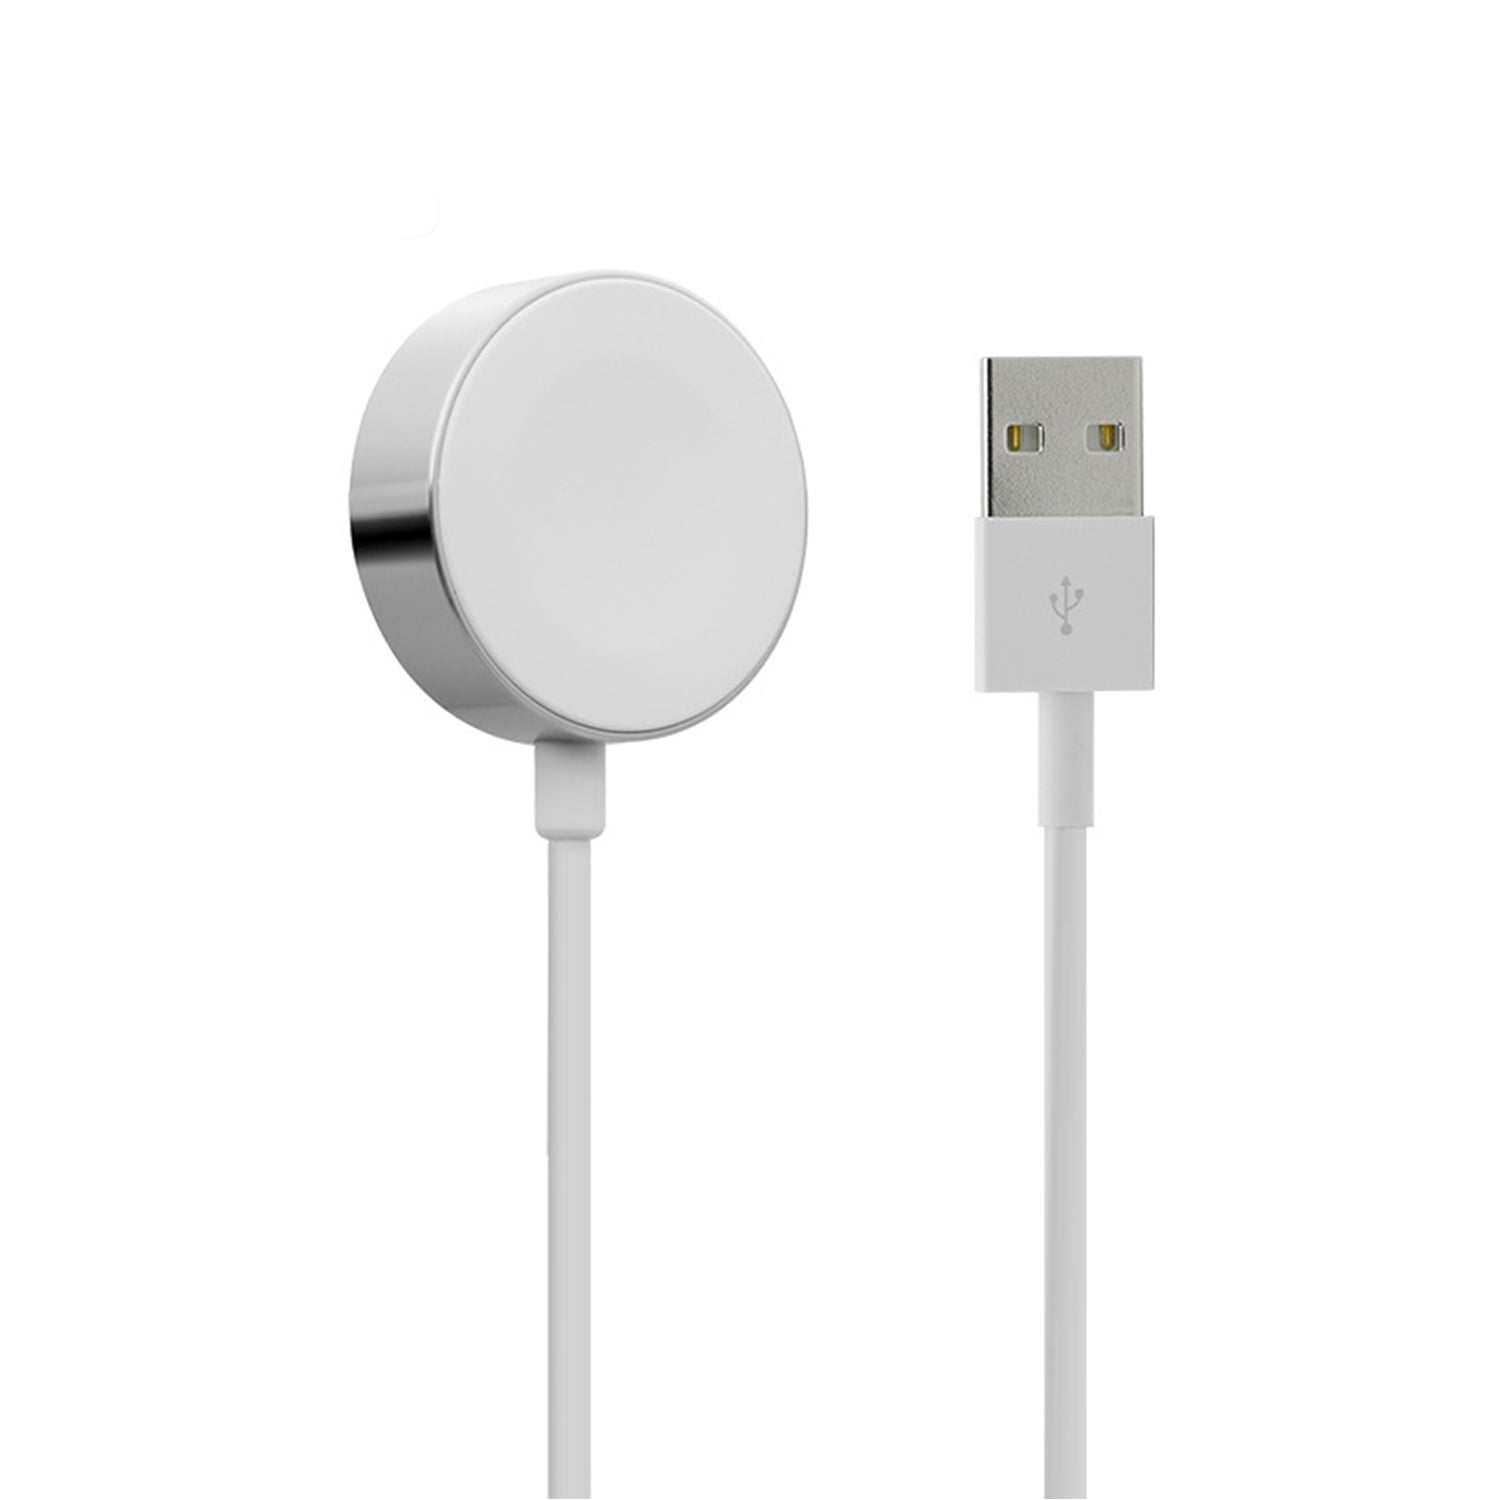 Wireless Magnetic Charger for Apple Watch - White